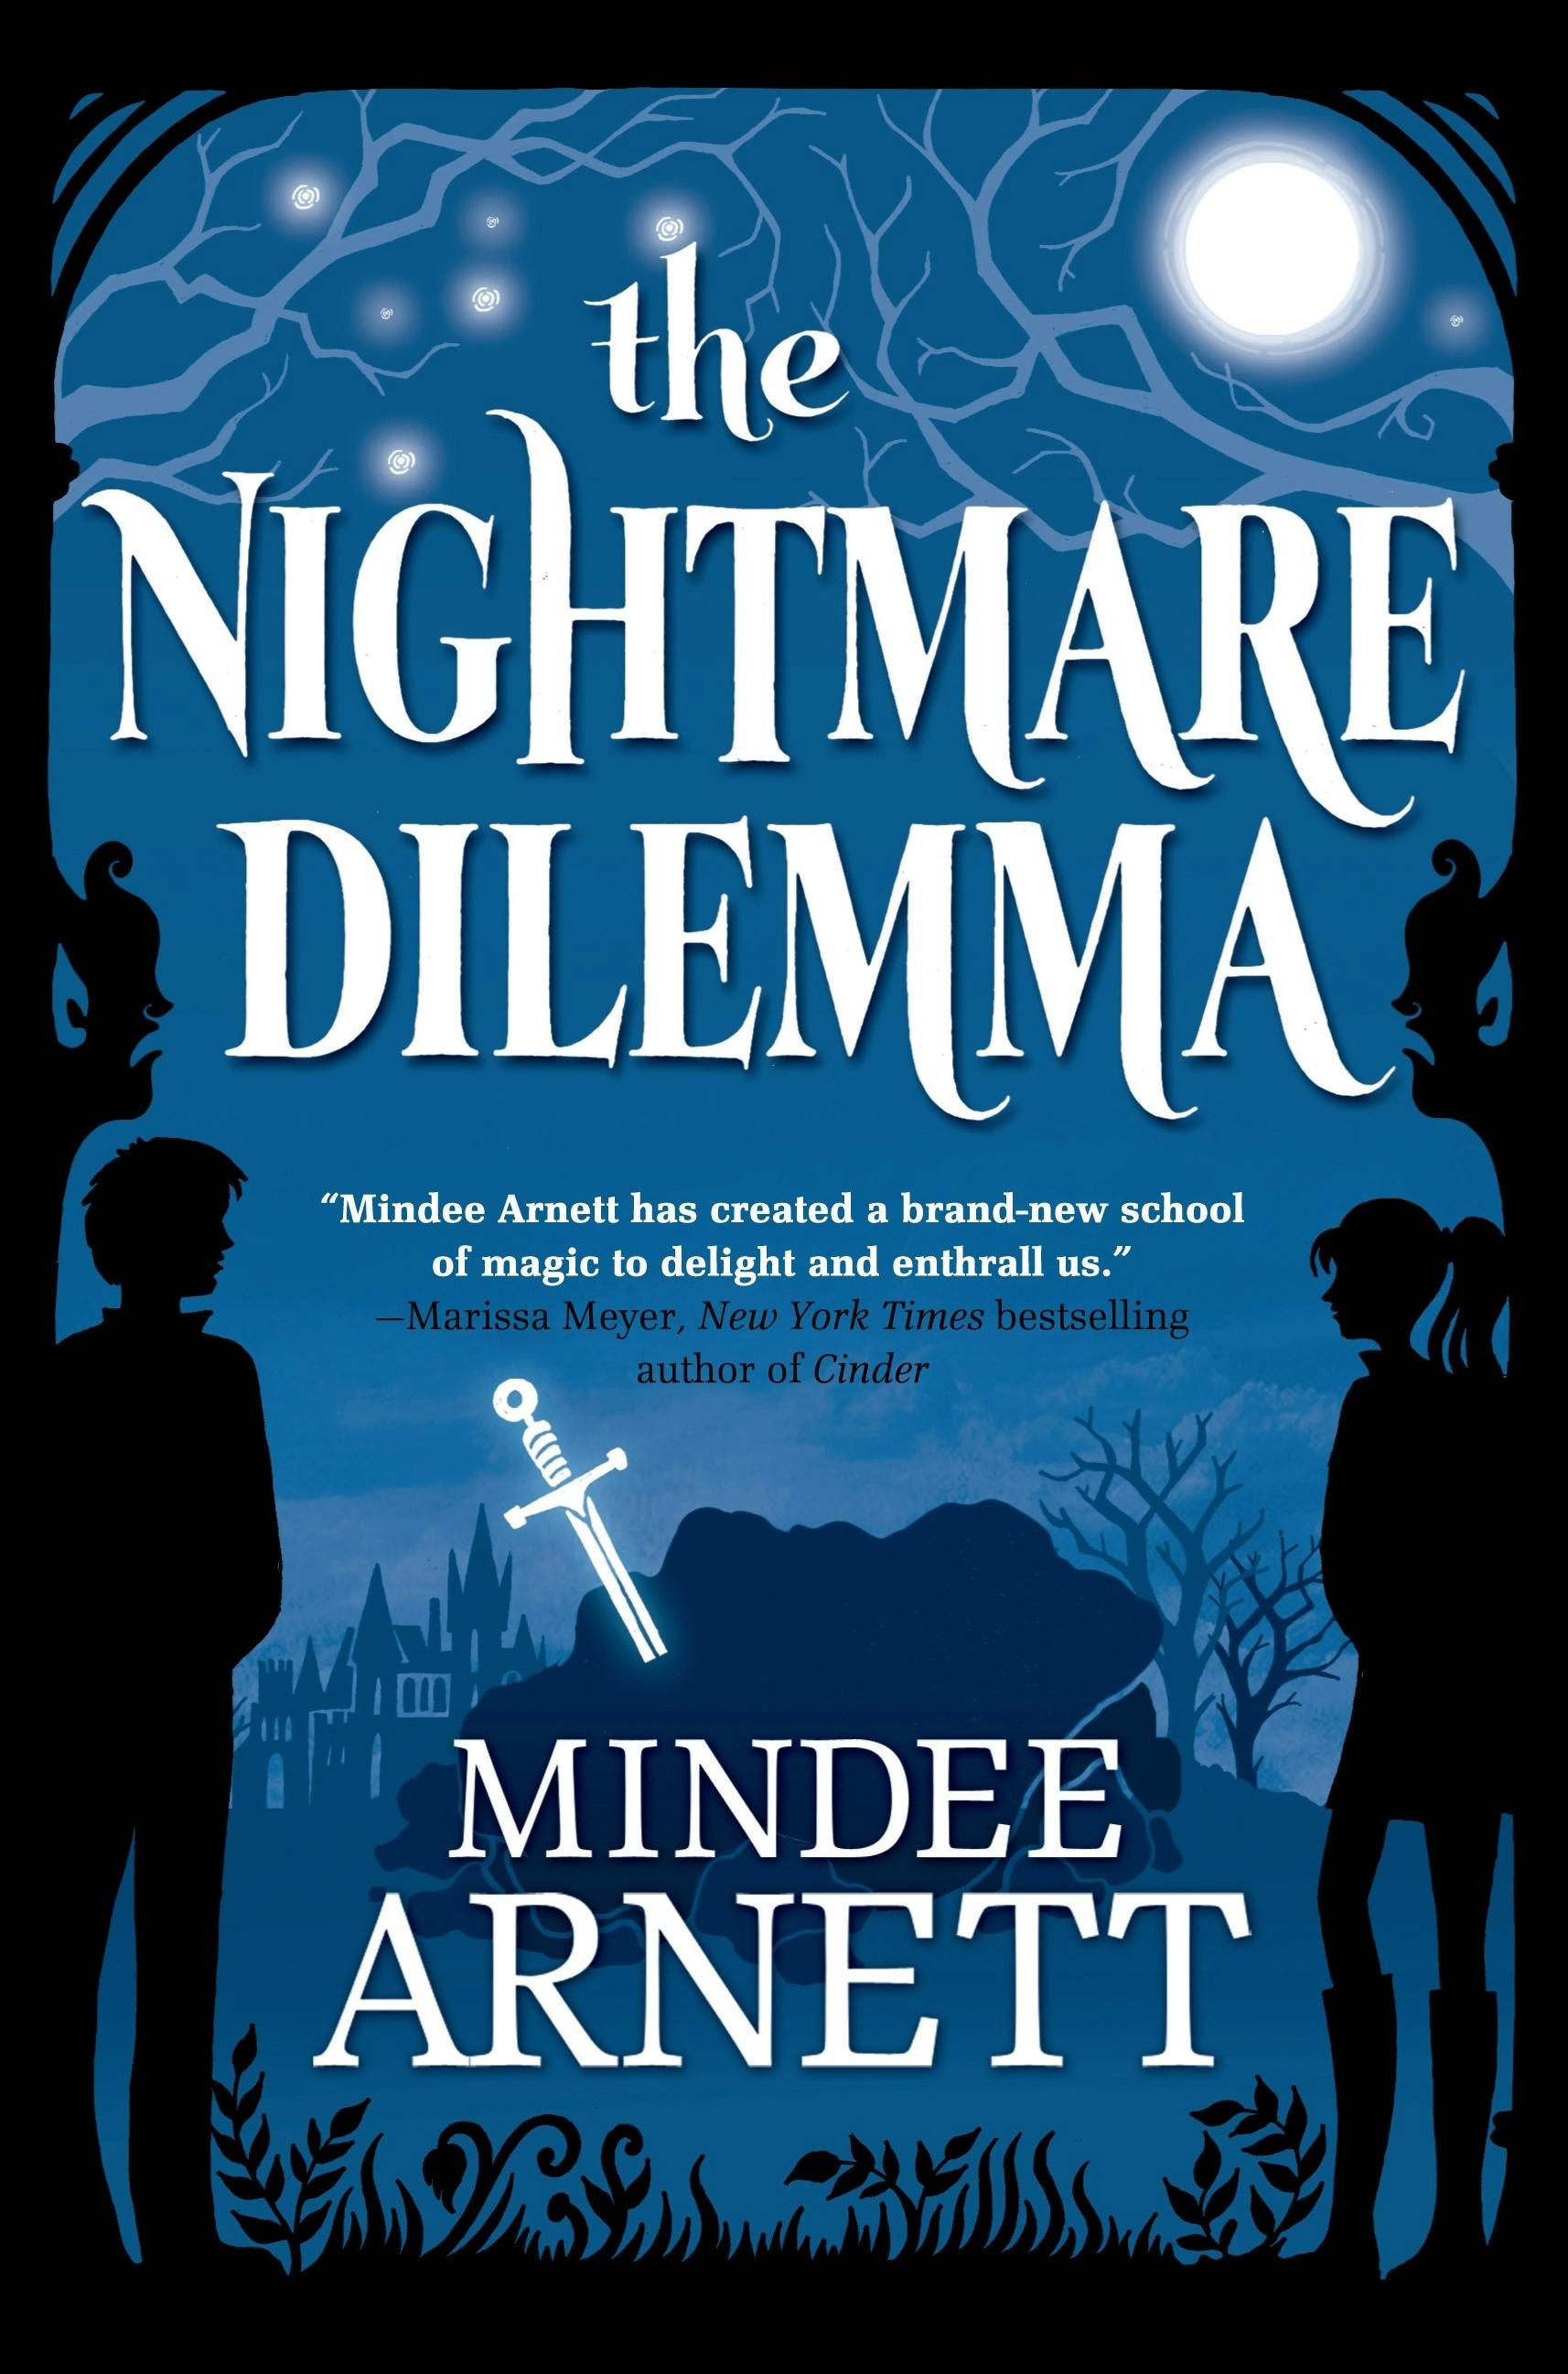 Cover for the book titled as: The Nightmare Dilemma